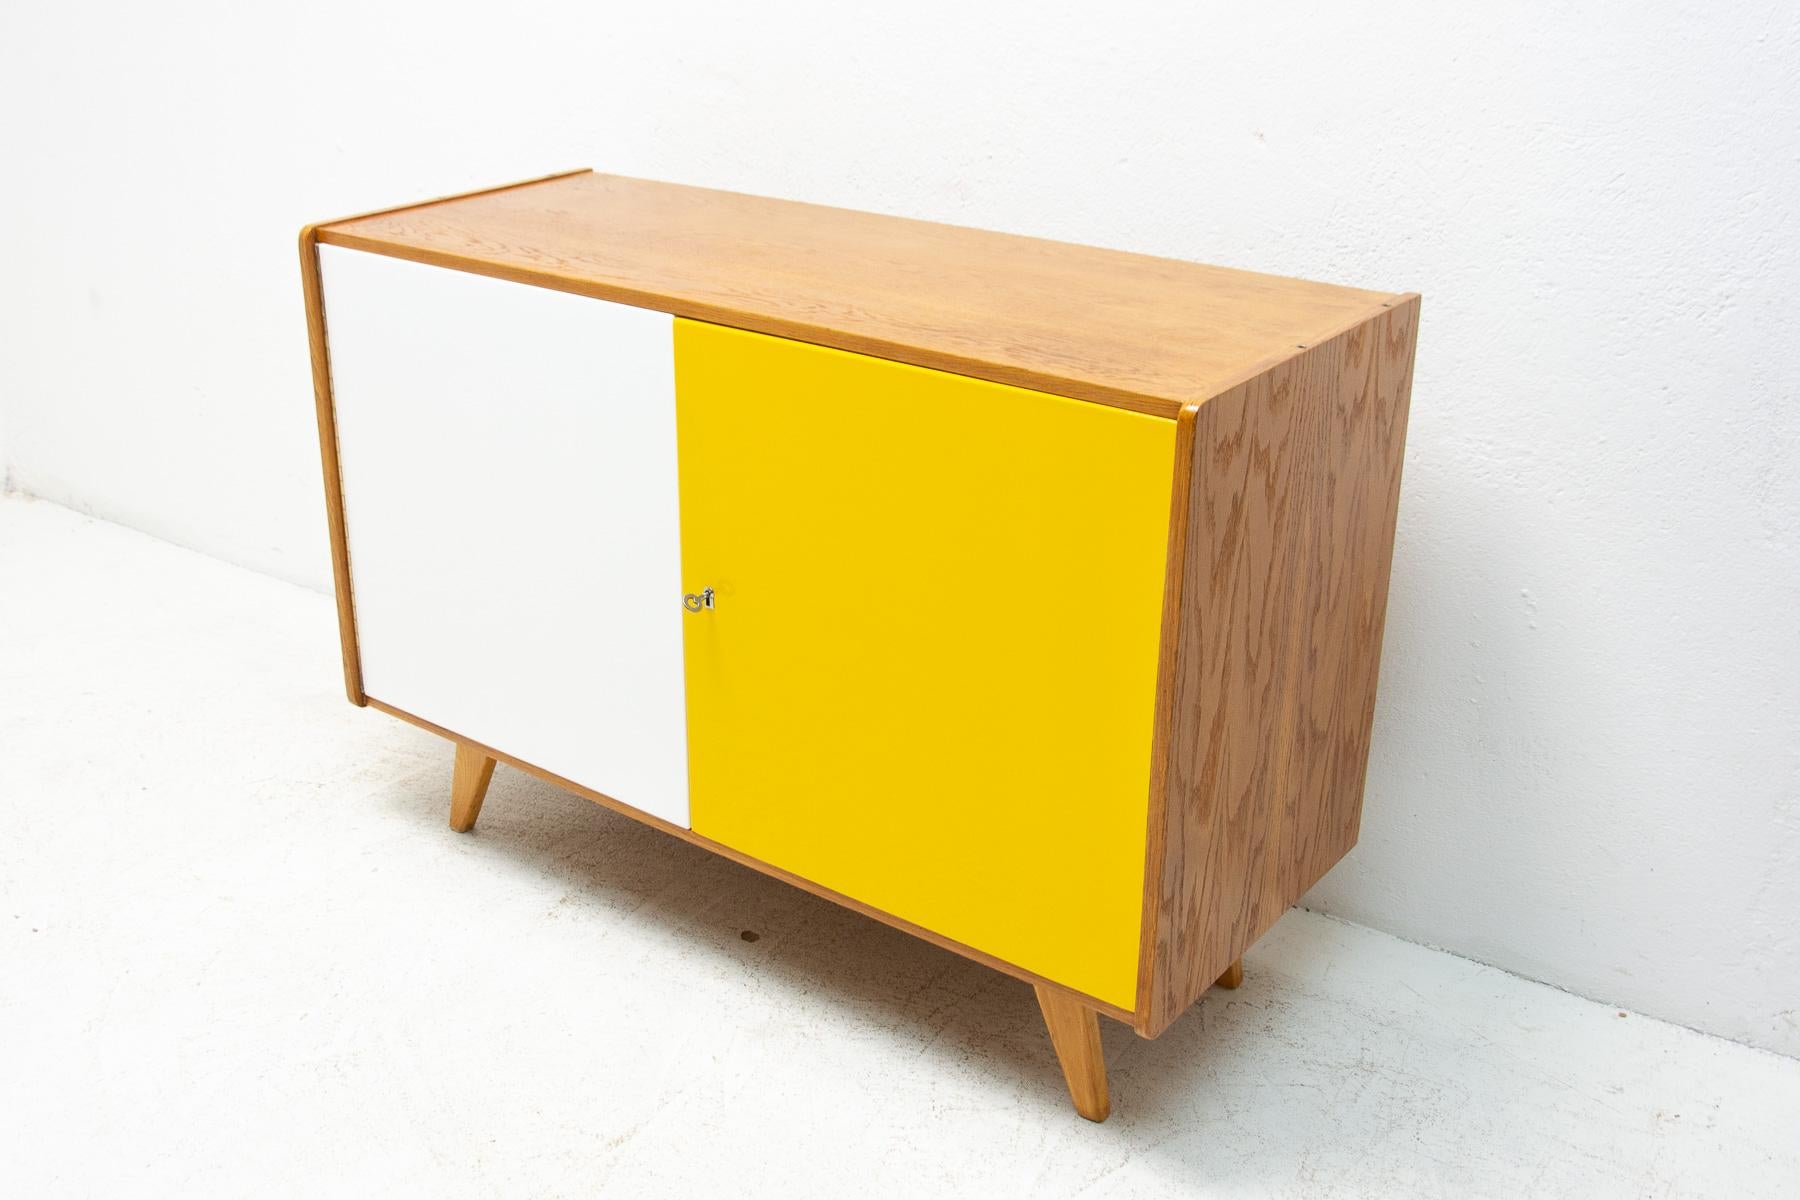 Mid century sideboard-cabinet, catalogue No. U-450, designed by Jiri Jiroutek. It´s made of beechwood, veneer, plywood and laminate. In excellent condition, fully refurbished.

The cabinet comes from the famous Universal series (U-450), which was